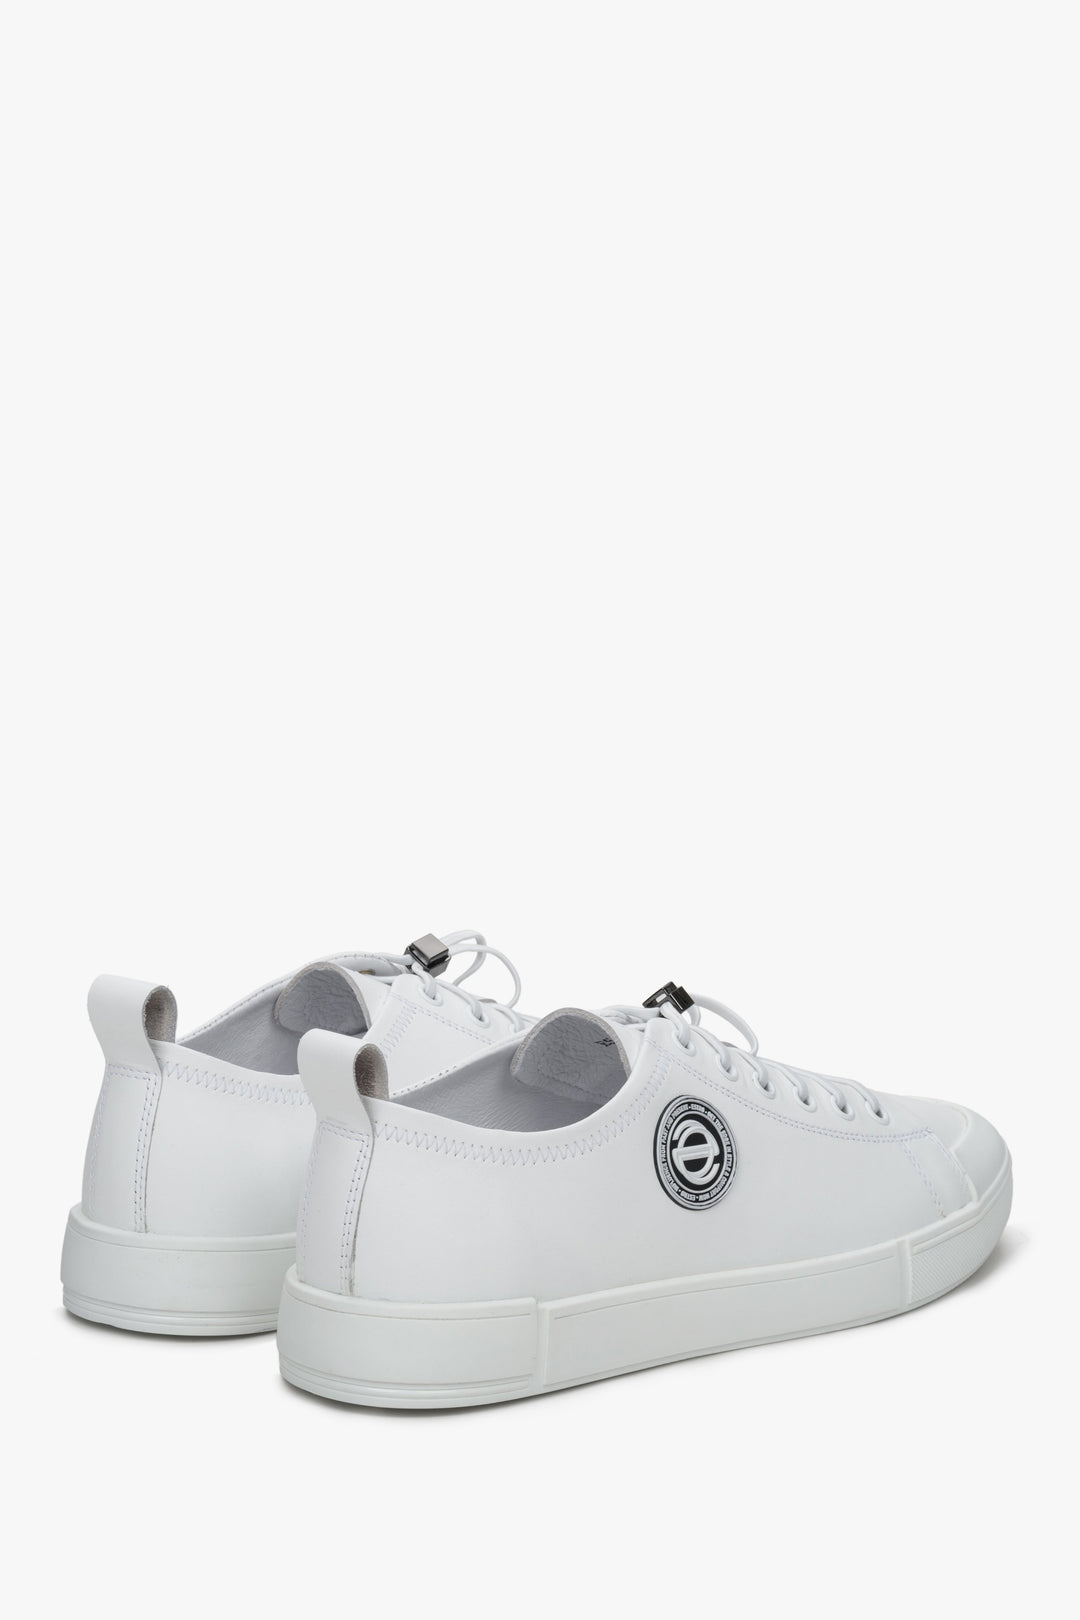 Men's sneakers made of genuine white leather by Estro - presentation of the heel and side seam of the shoe.